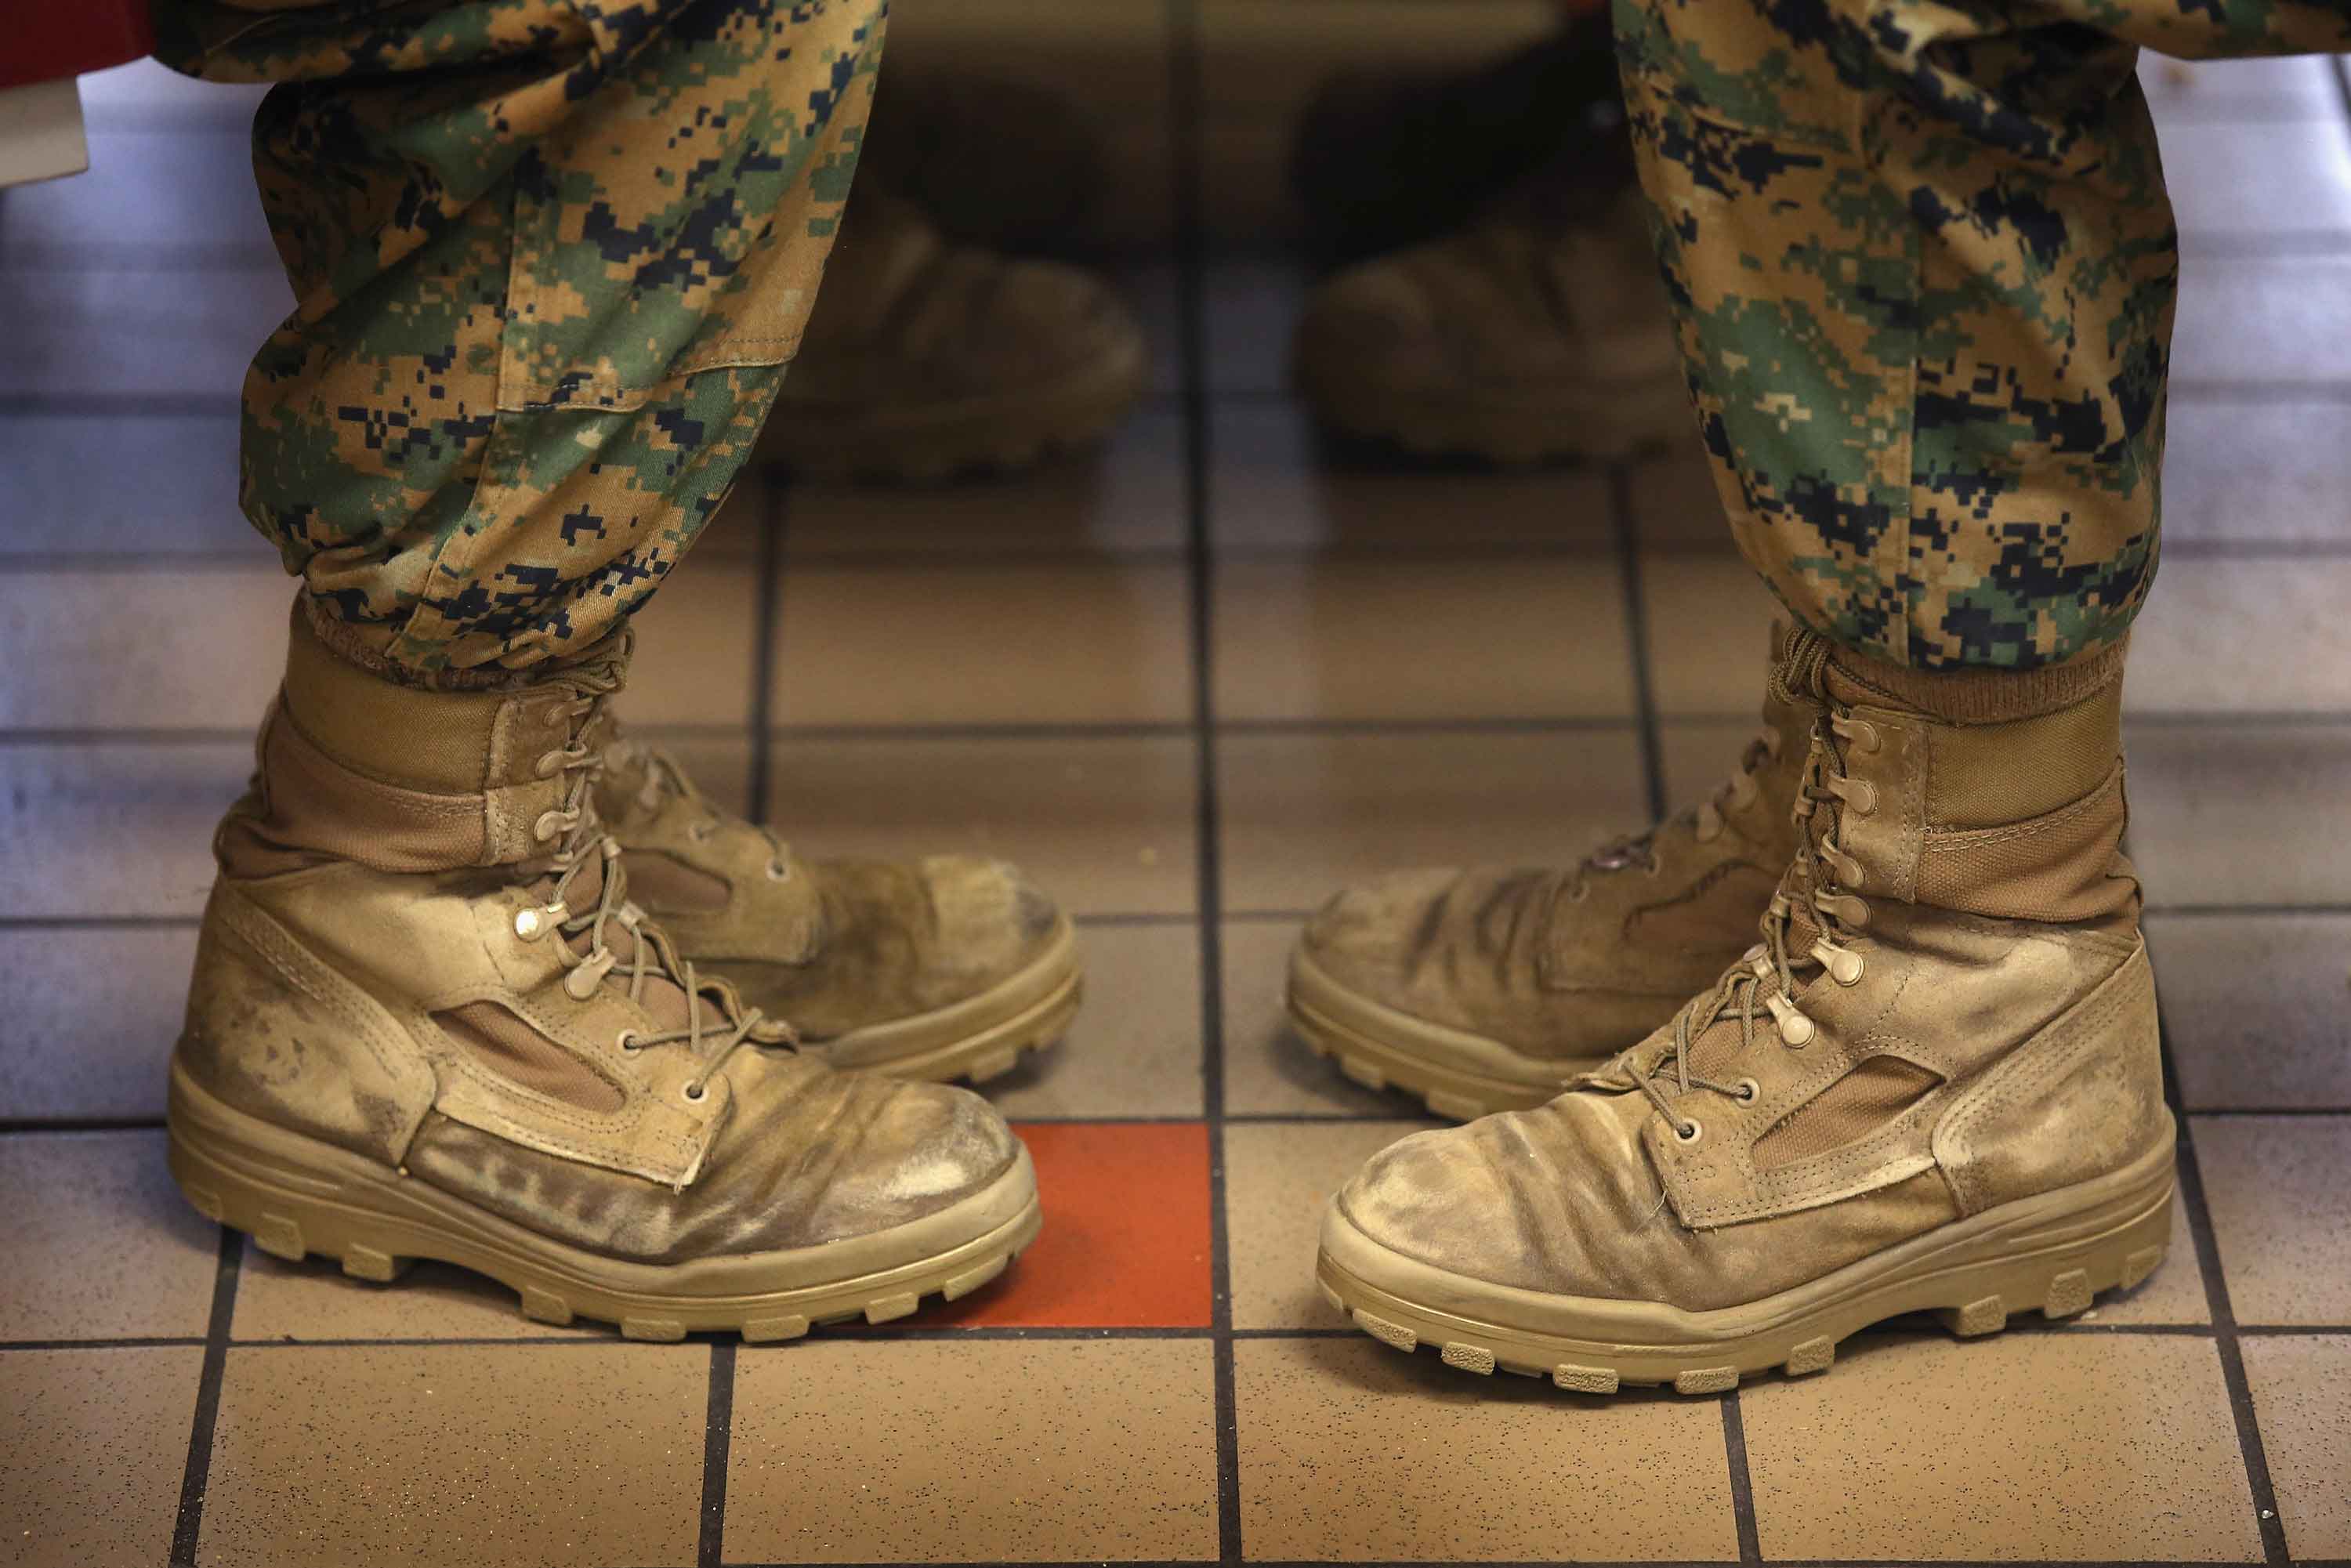 Marine intel instructors caught degrading students in private chat group